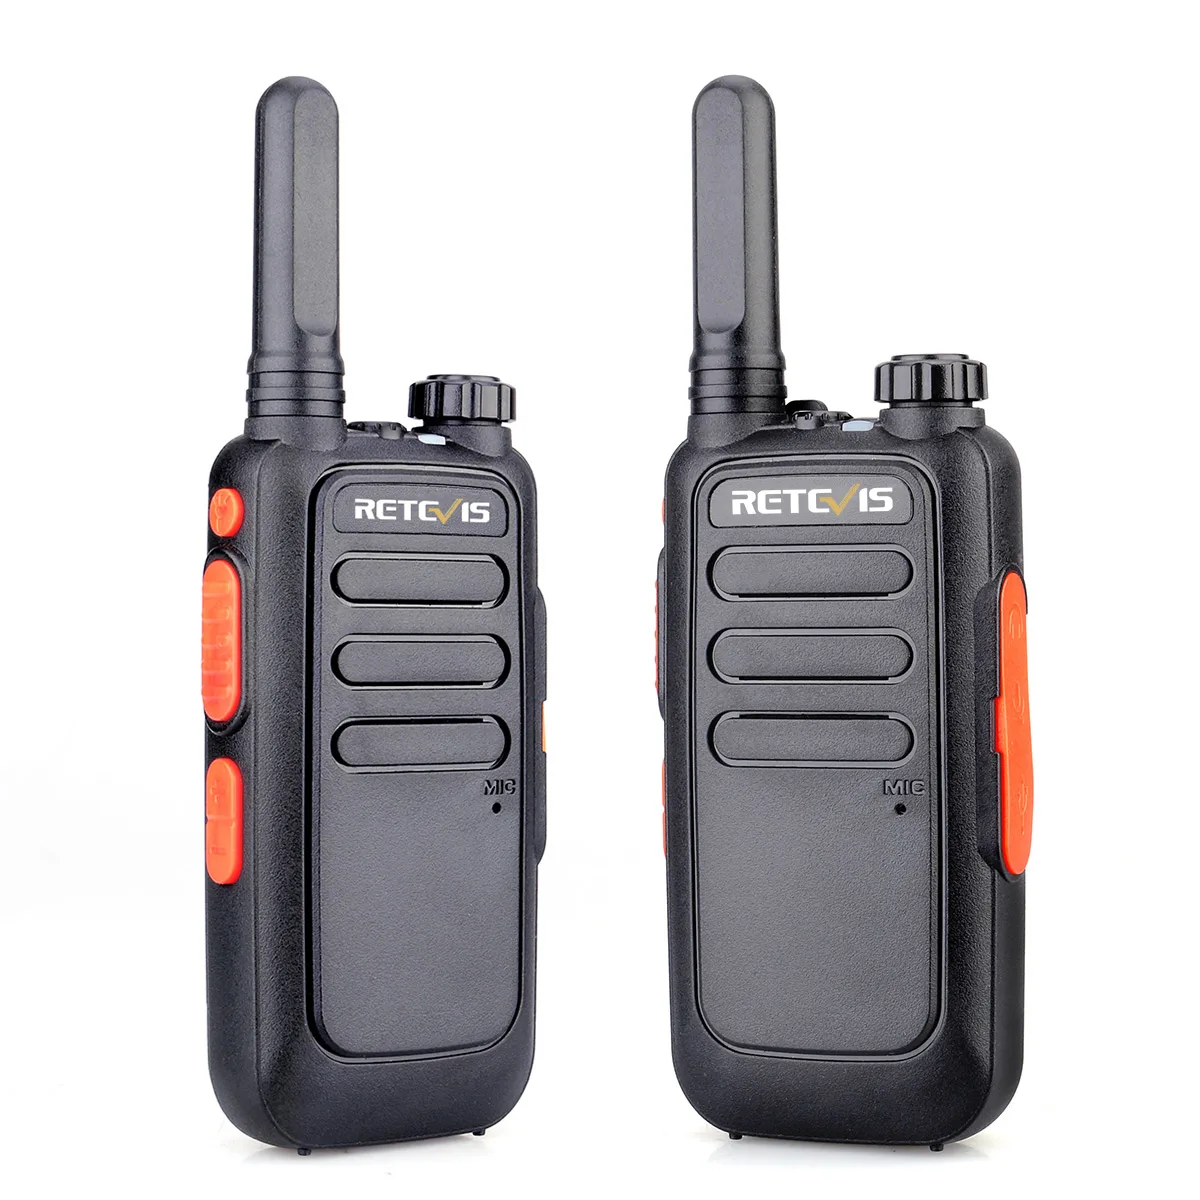 

Cheap License free walkie talkie Retevis RT669 0.5W CTCSS/DCS TOT VOX Scan PMR446 Two Way Radio For USA Canada